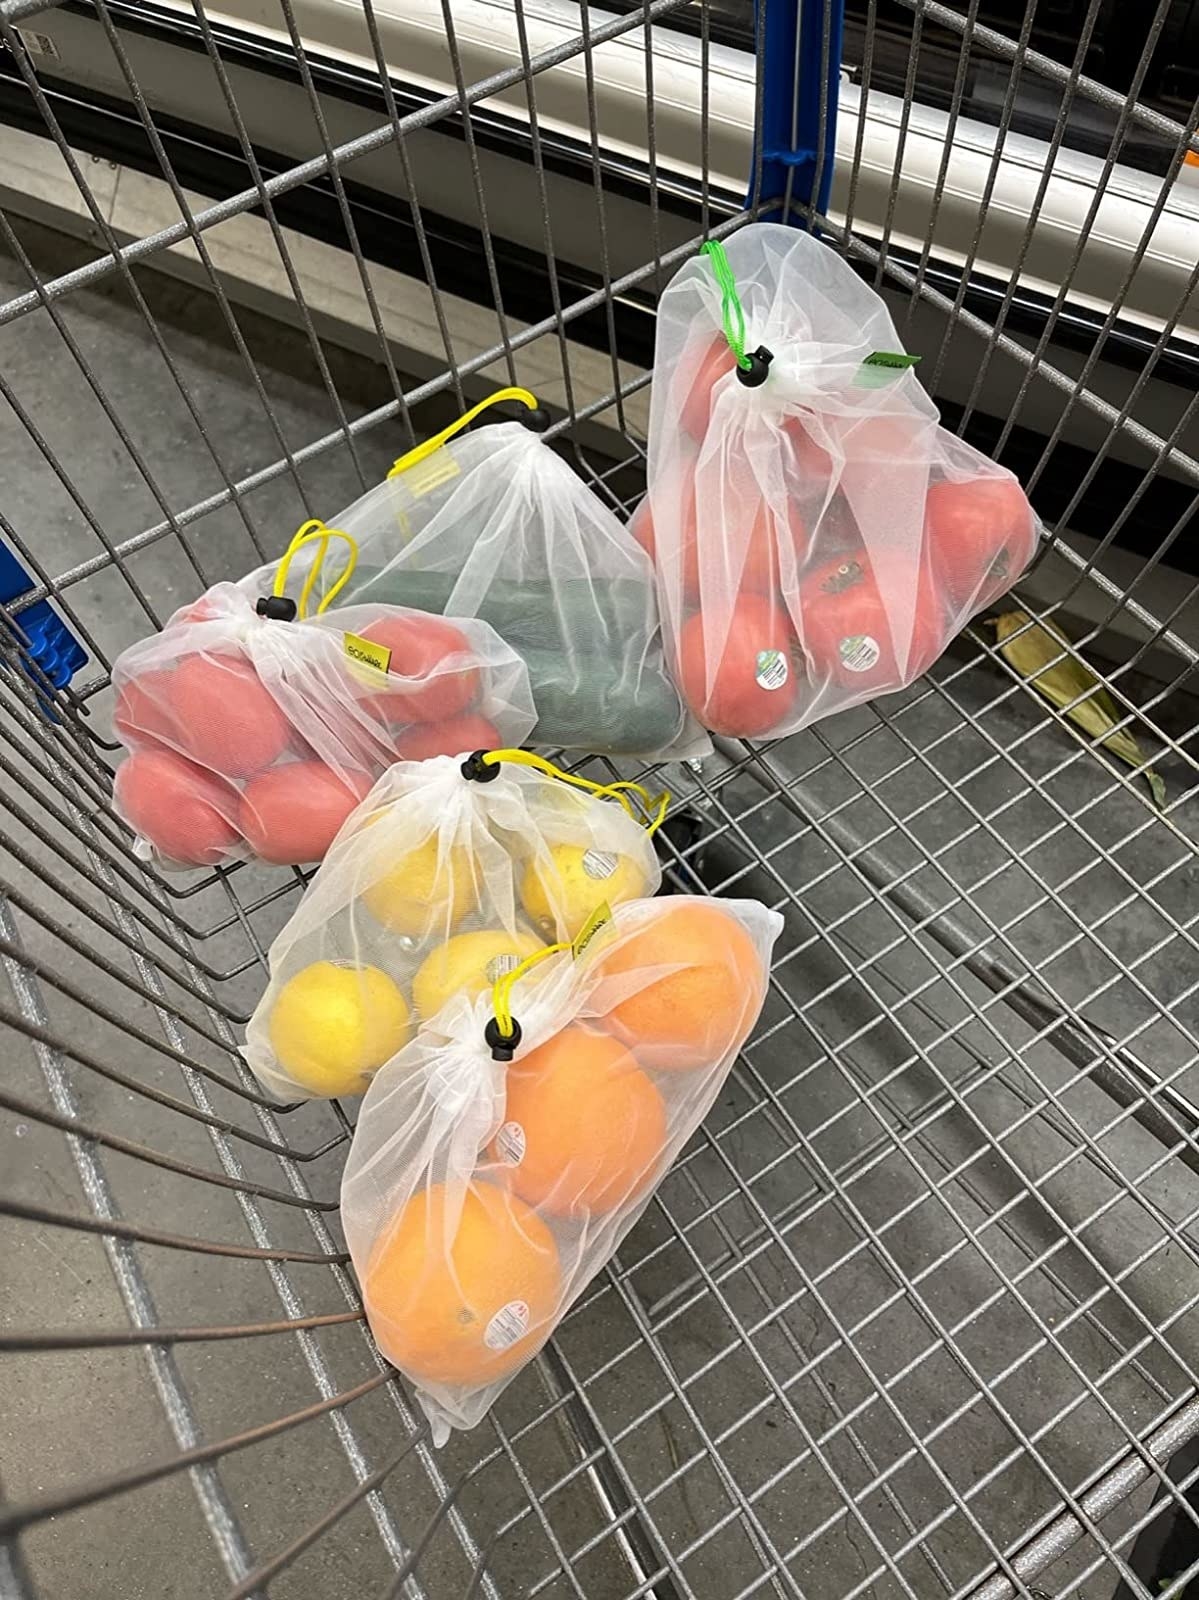 Reviewer image of the reusable bags holding produce in their shopping cart